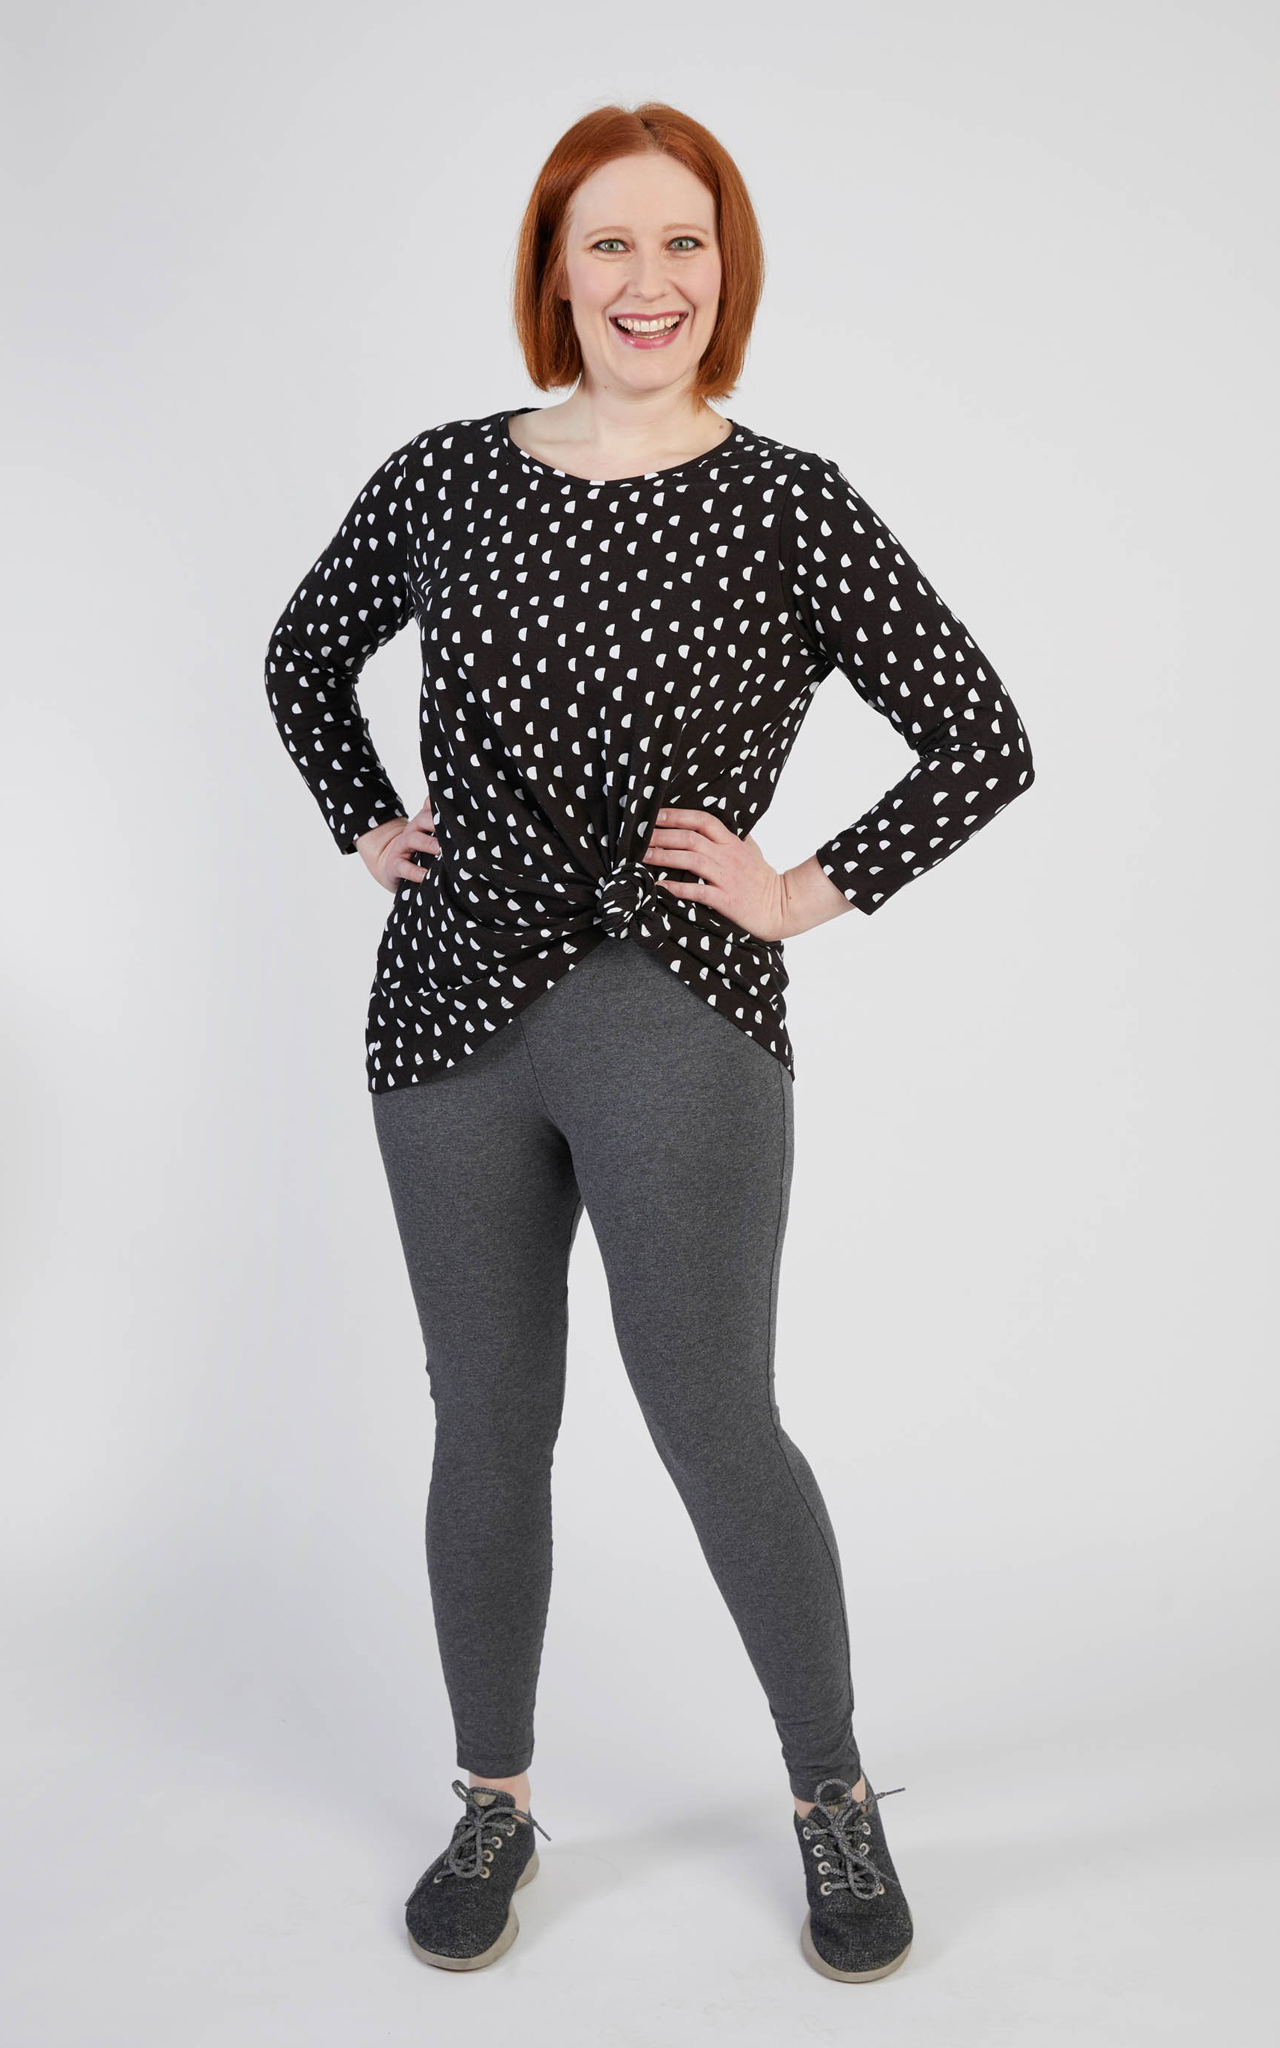 Belmont Leggings, now in print! Plus activewear collection in